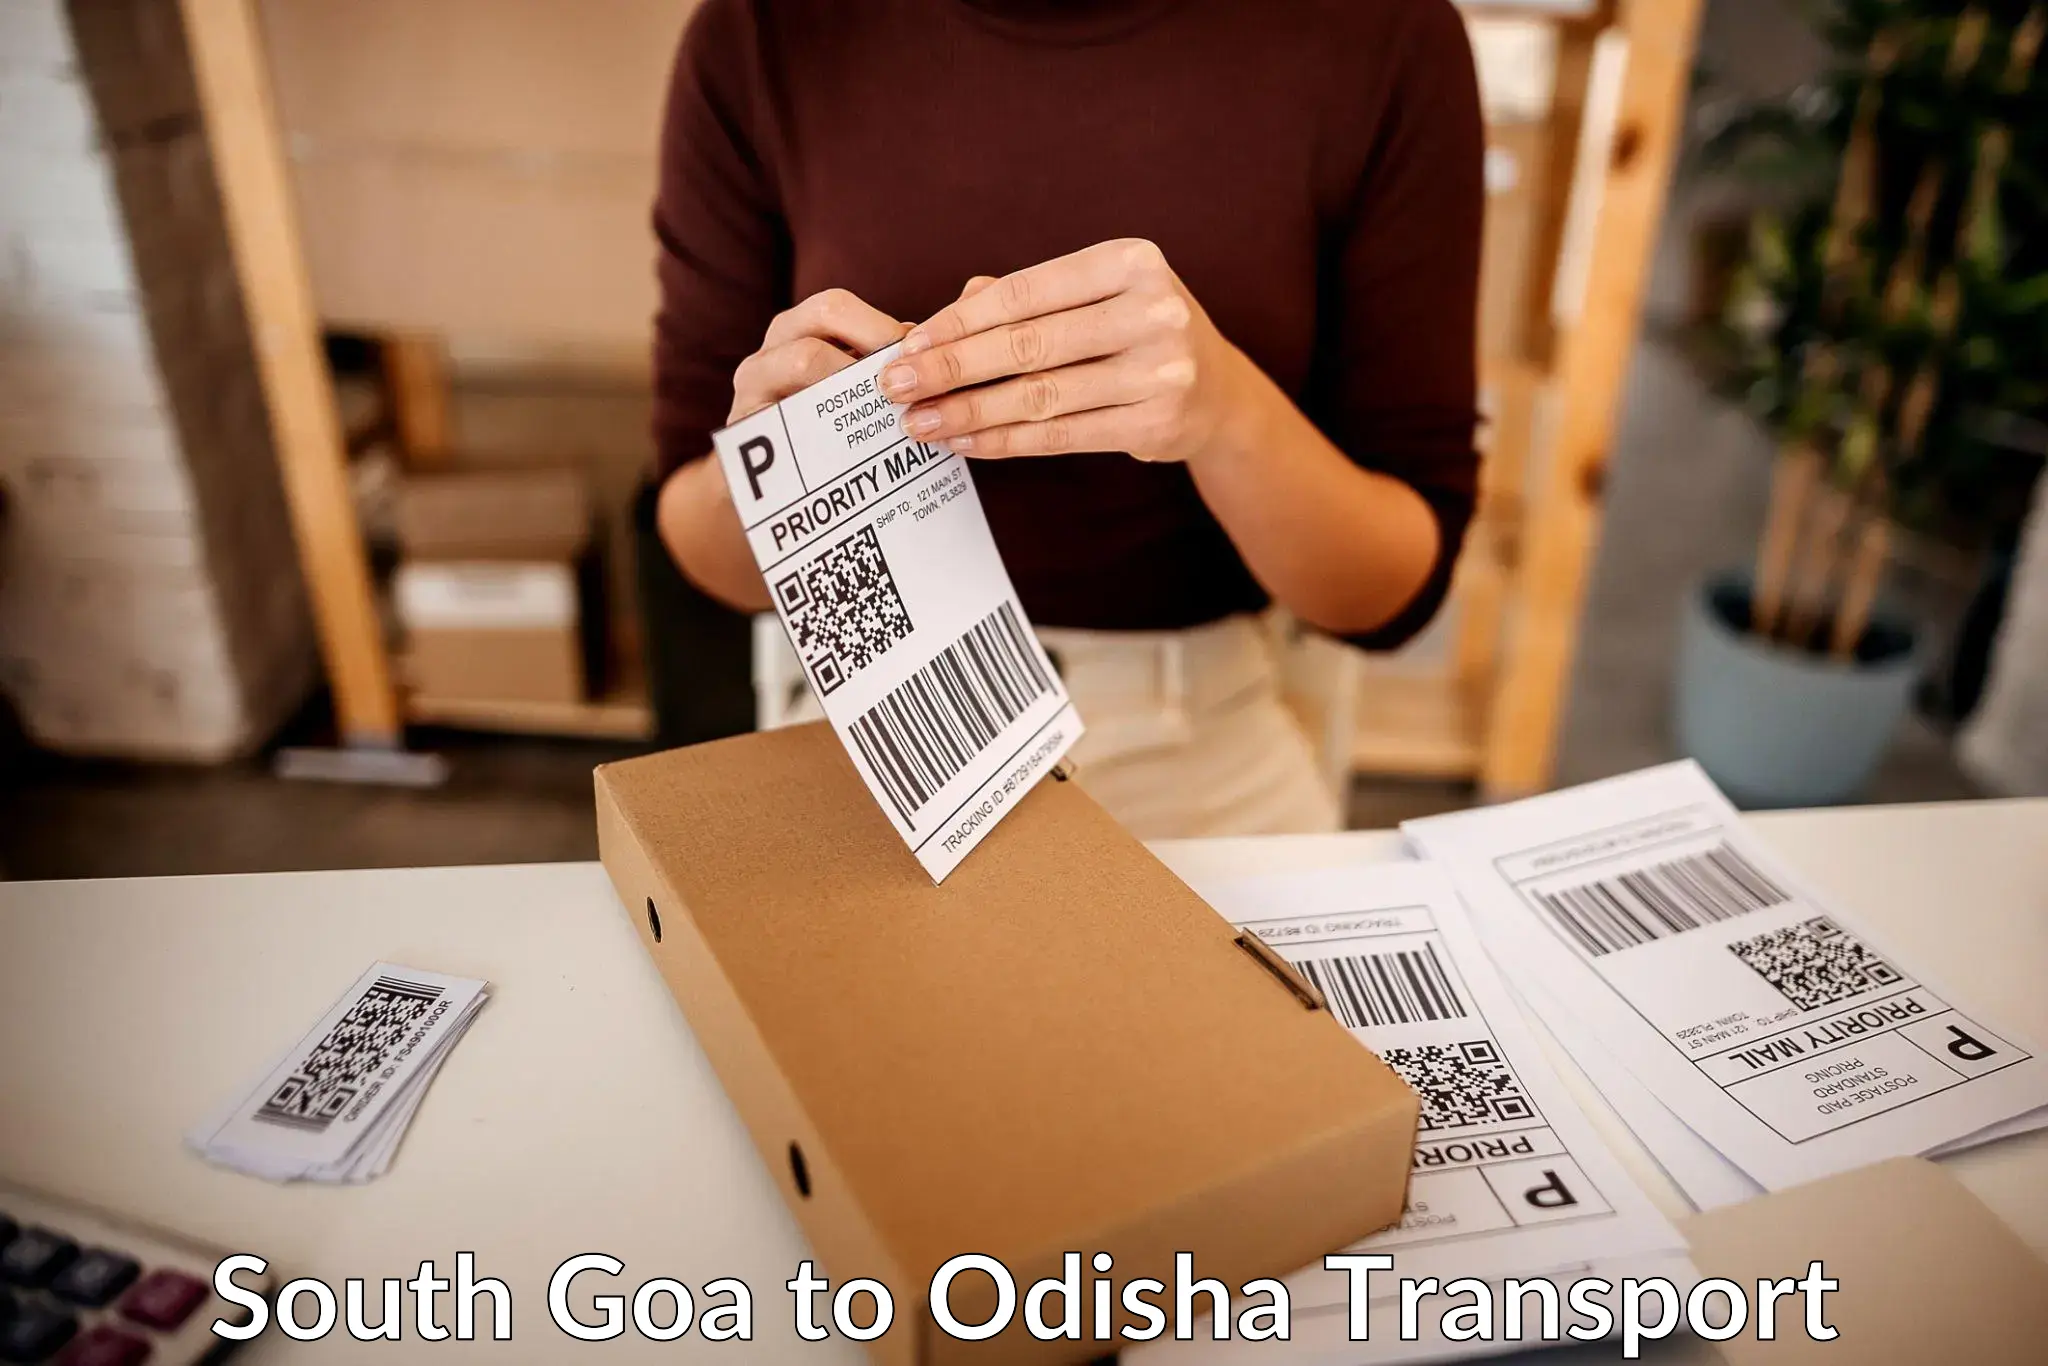 Container transportation services South Goa to Binka